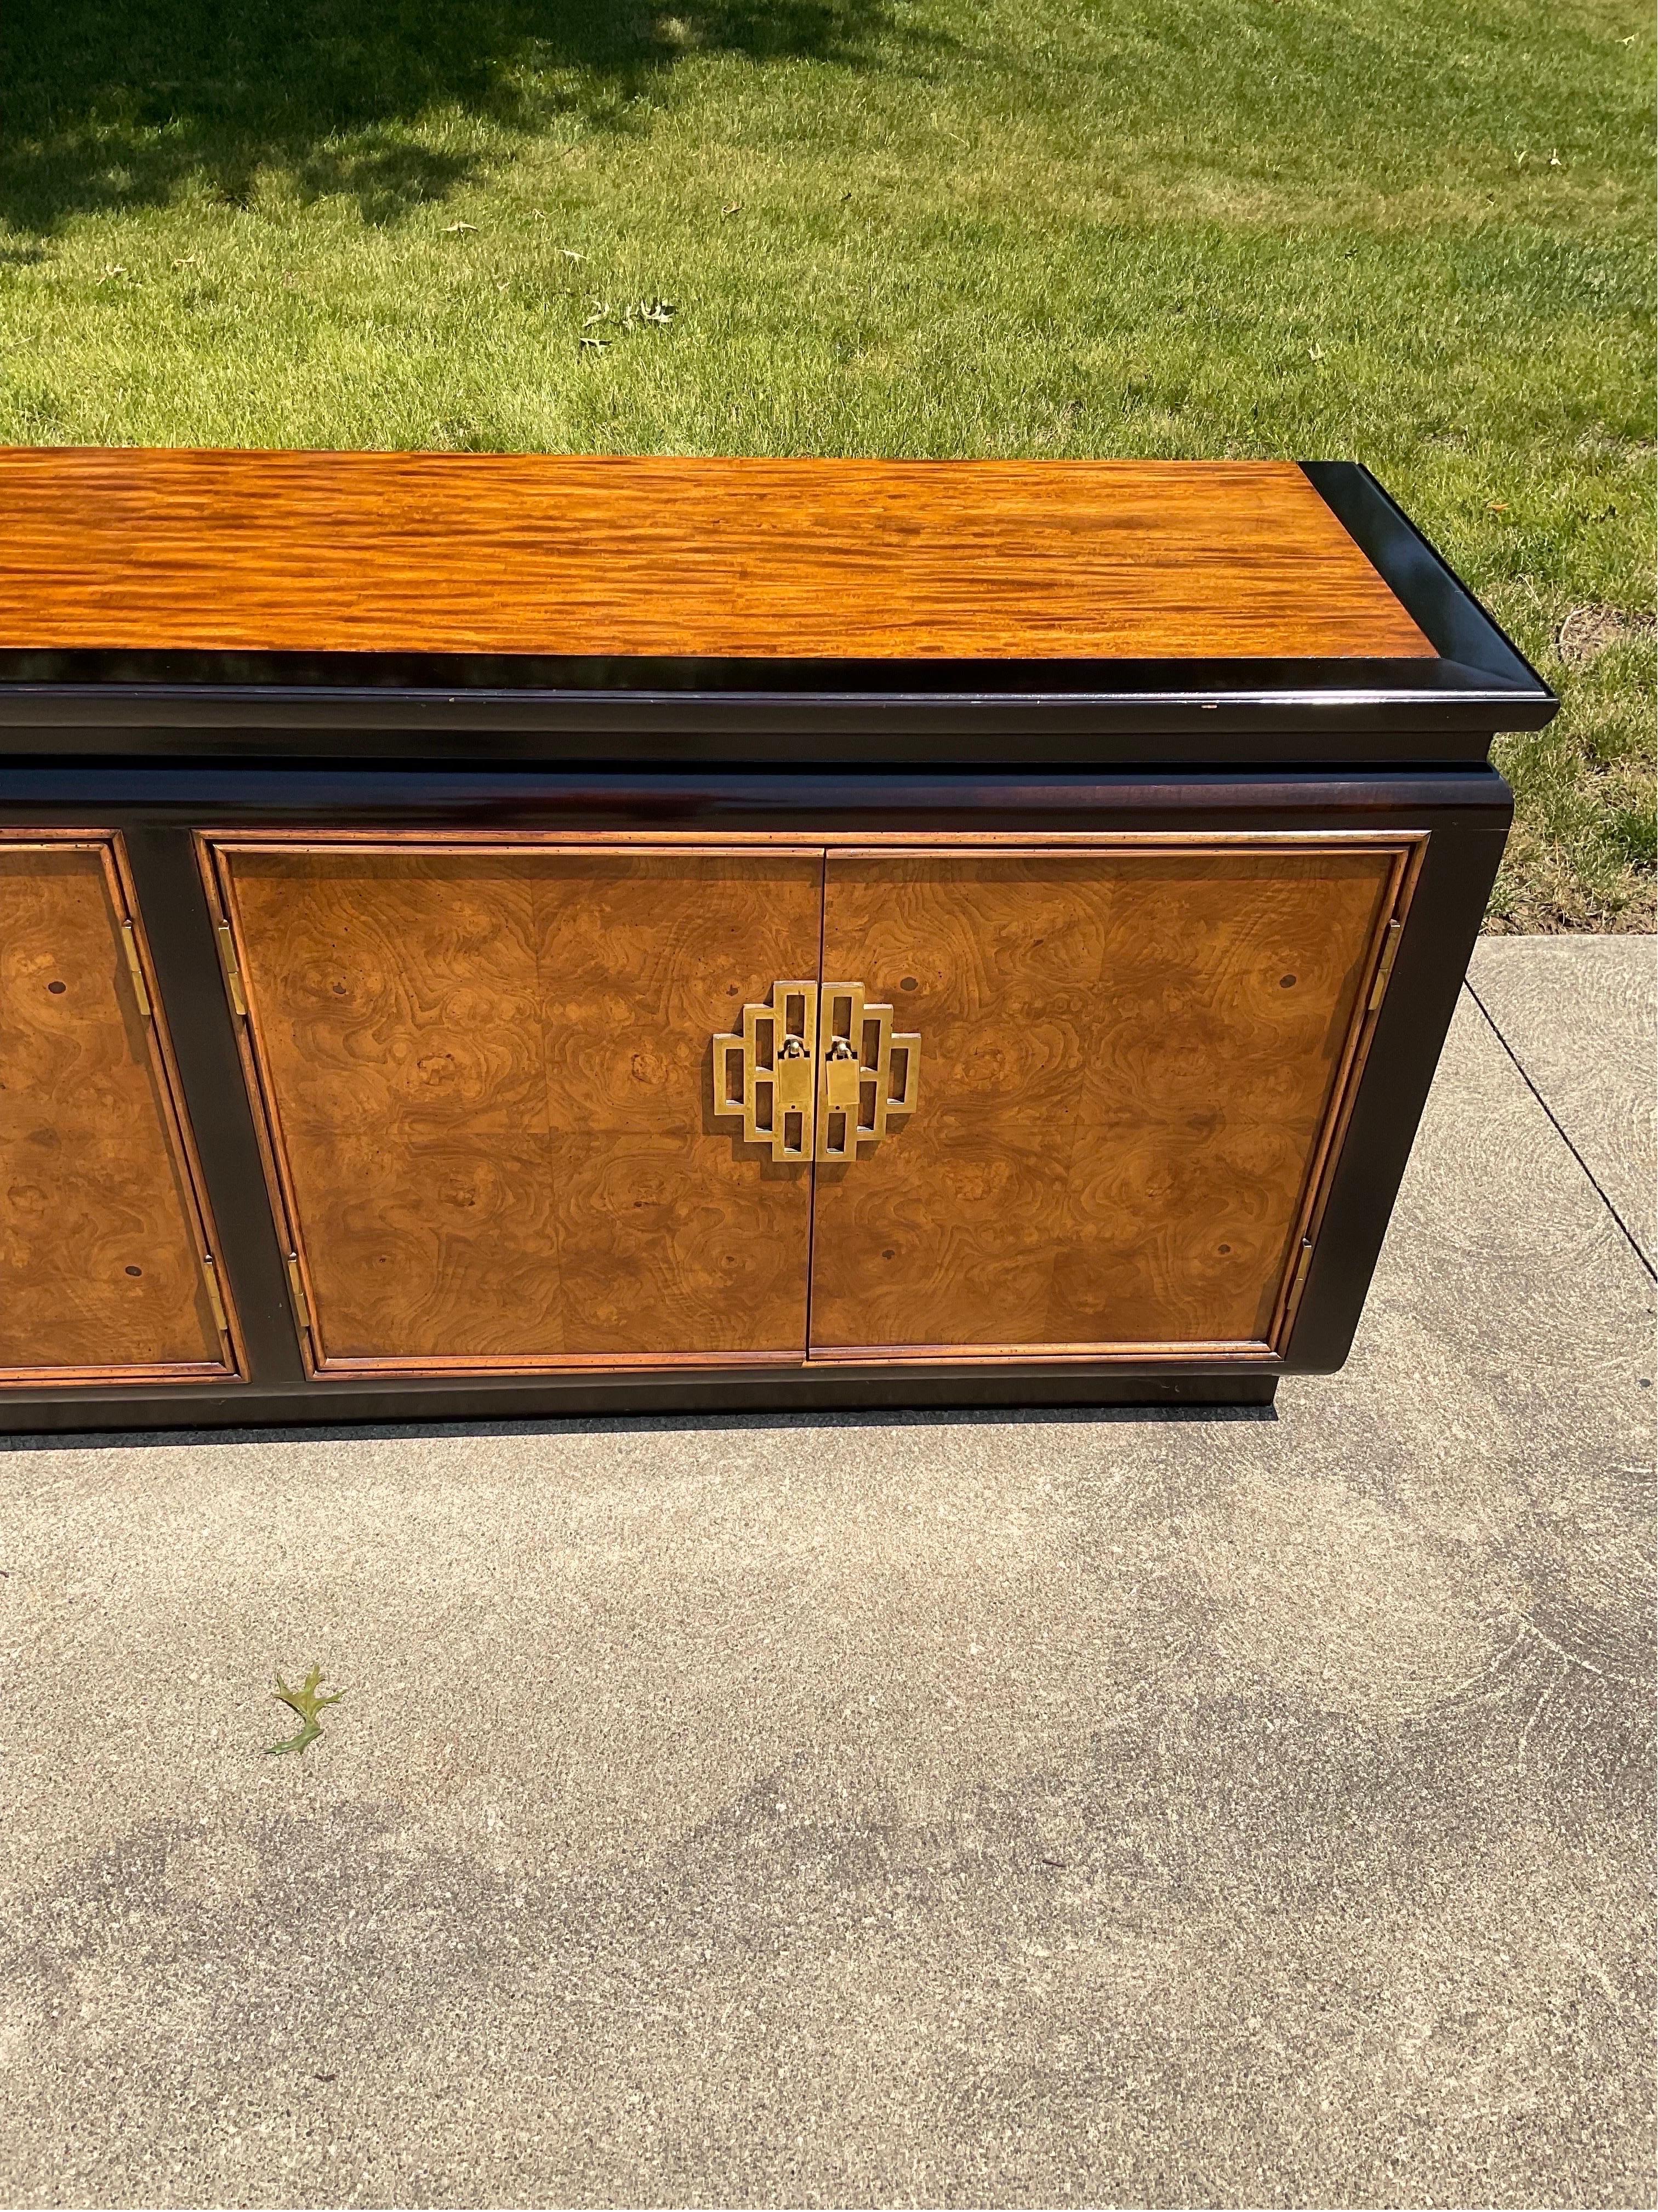 Beautiful piece from Century Furniture’s Raymond Sobota Designed Chin Hua Collection. One of the most recognizable pieces of vintage Chinoiserie Furniture. Spectacular Burled veneers surrounded by a lacquered, ebonized case. Incredible detail and